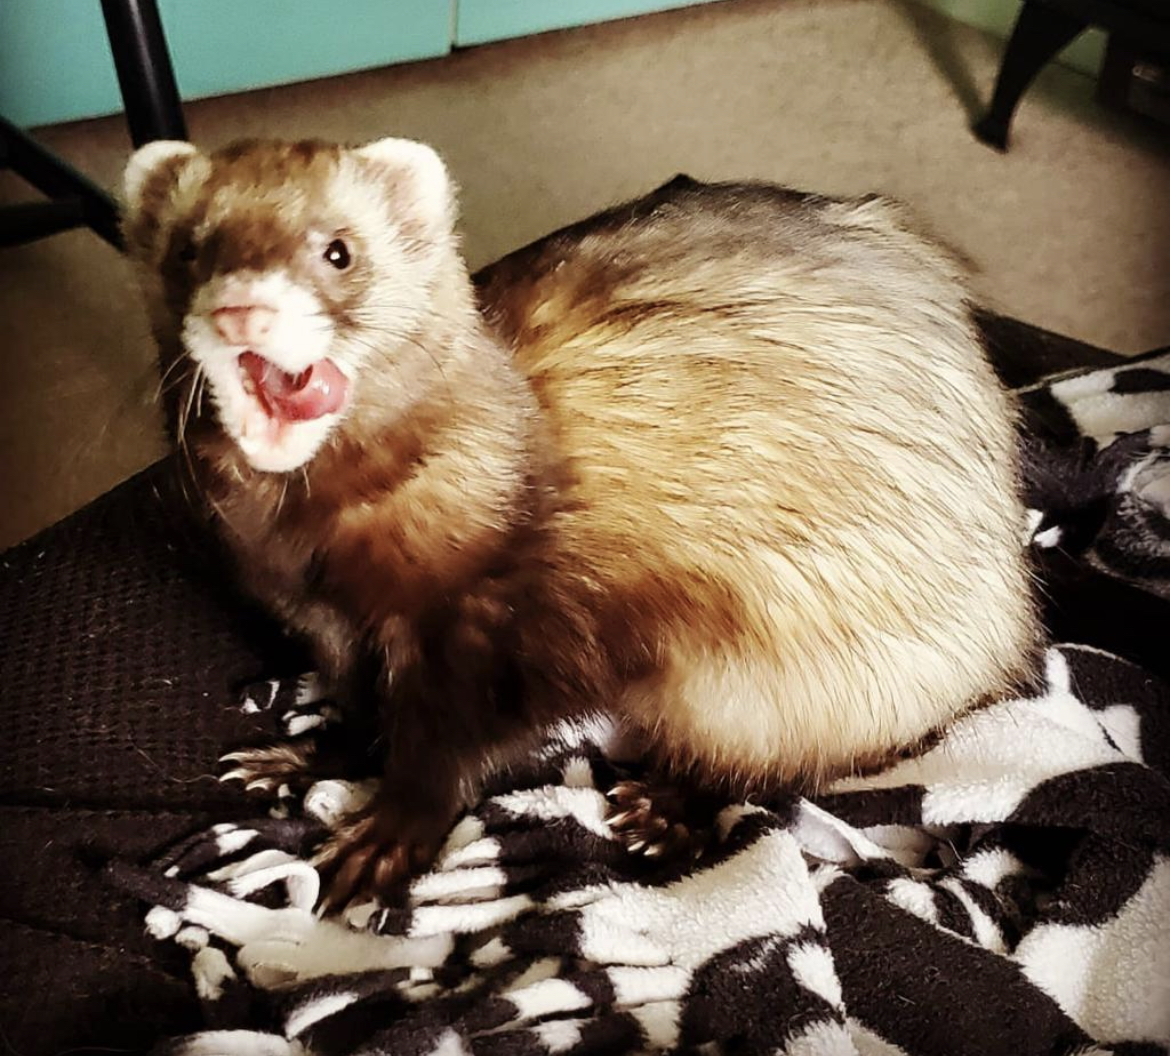 Ferret smiles while it cleans the fur on its face.